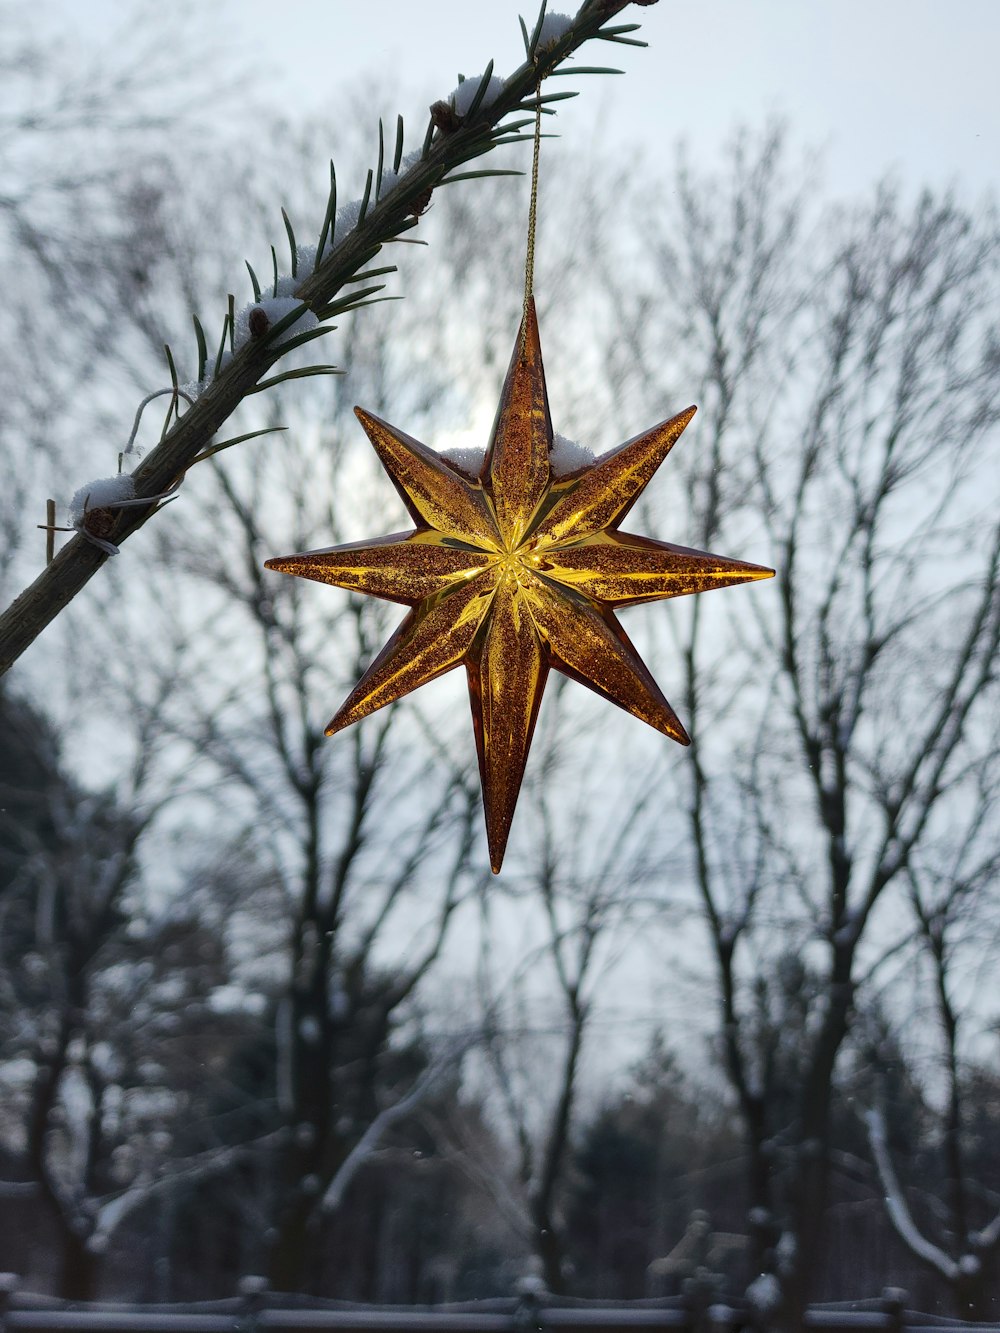 a star shaped ornament hanging from a tree branch